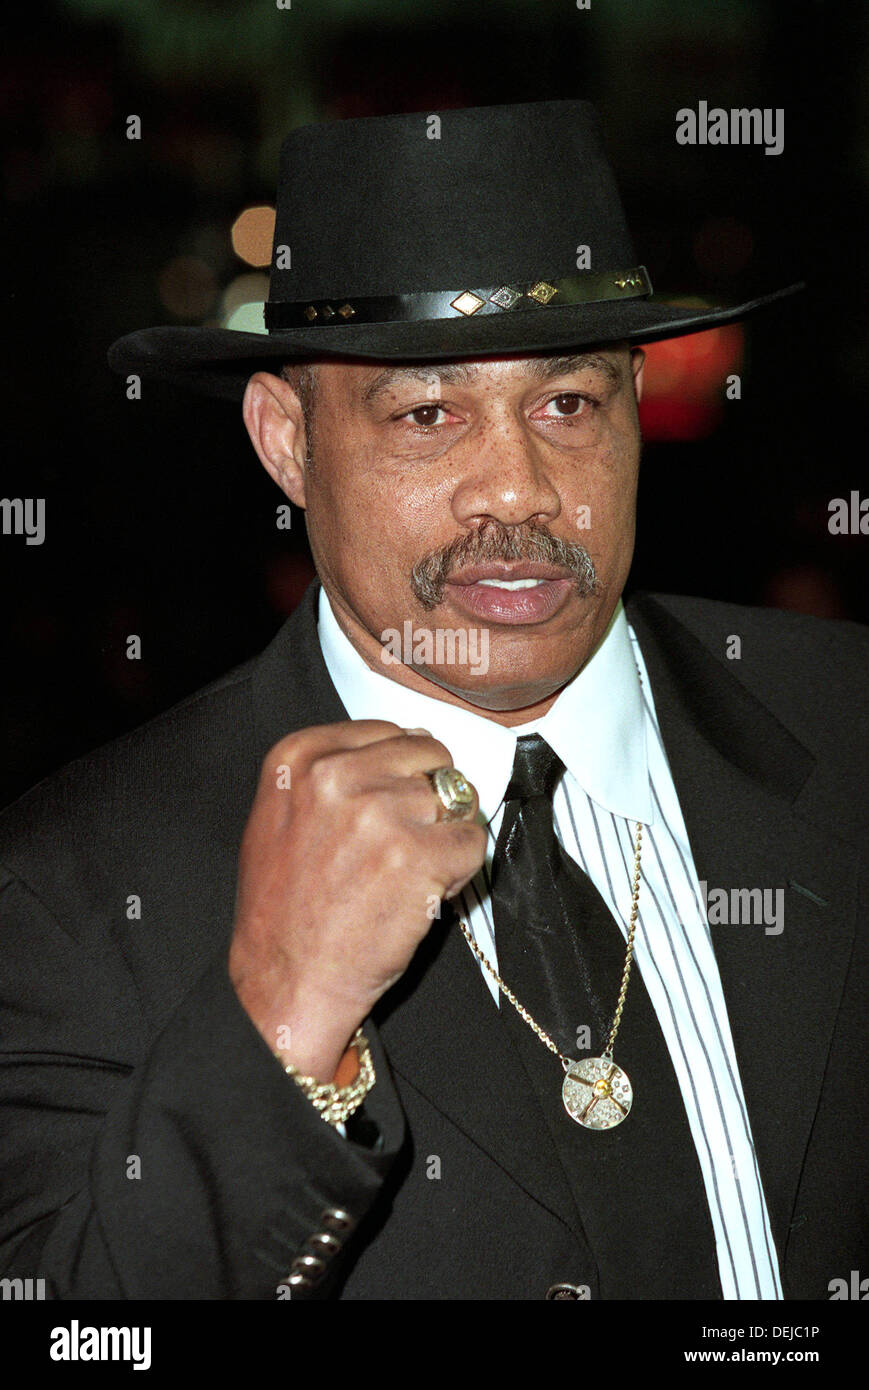 FILE PICS: September 18, 2013 - Kenneth Howard Norton Sr. (August 9, 1943 - September 18, 2013) was an American former heavyweight boxer and former WBC world Heavyweight Champion. He was best known for his 12-round victory over M. Ali, when he famously broke Ali's jaw, on March 31, 1973, becoming only the second man to defeat a peak Ali as a professional. PICTURED: Dec. 12, 2001 - Los Angeles - Actor Boxer Ken Norton. Credit:  ZUMA Press, Inc./Alamy Live News Stock Photo